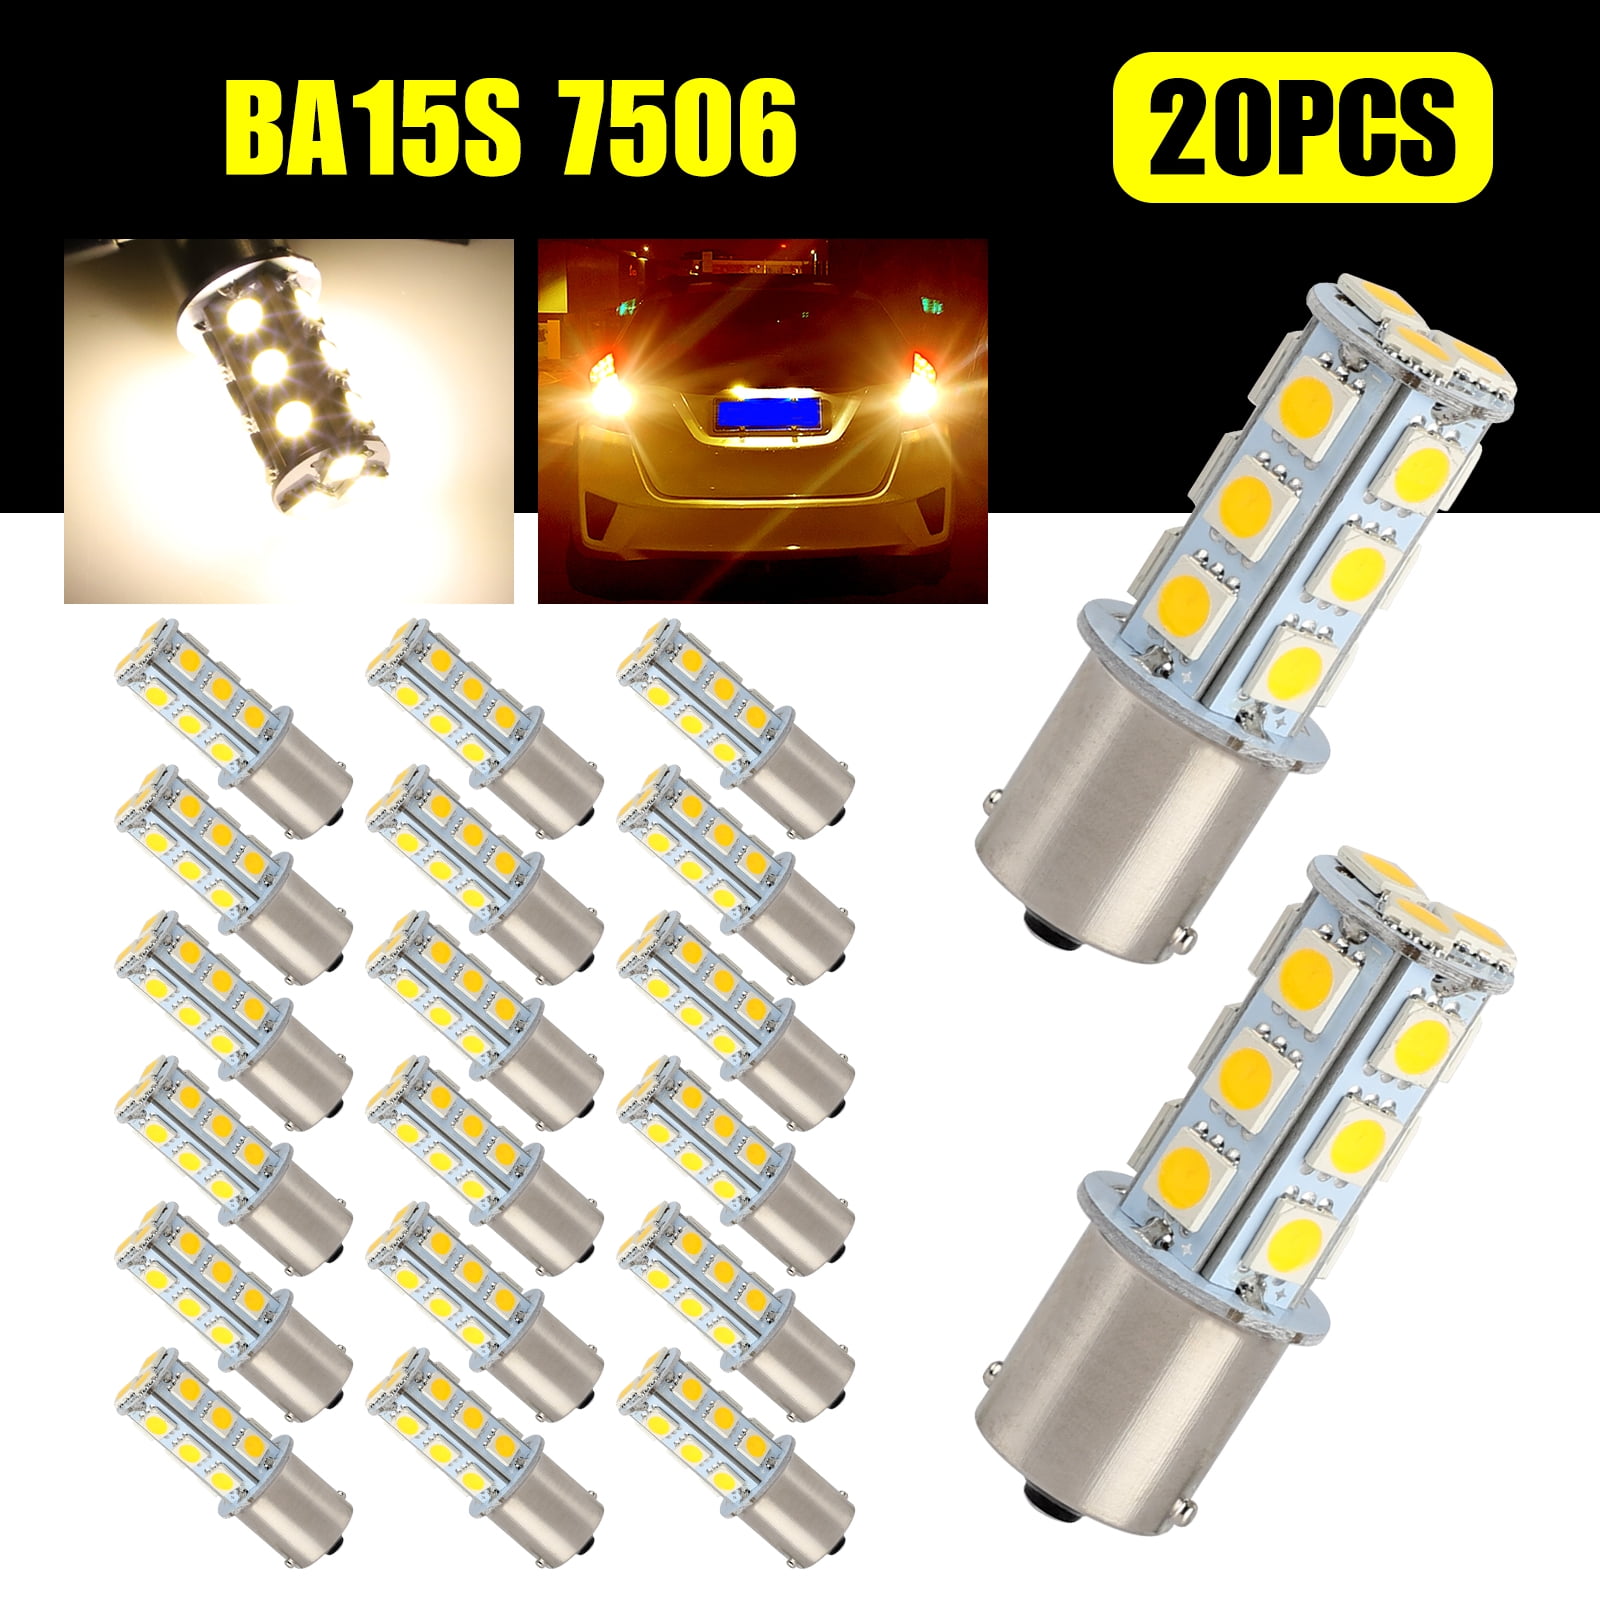 2-1156 Single Function 27 SMD Tower 12 volt LED Cool White BA15S